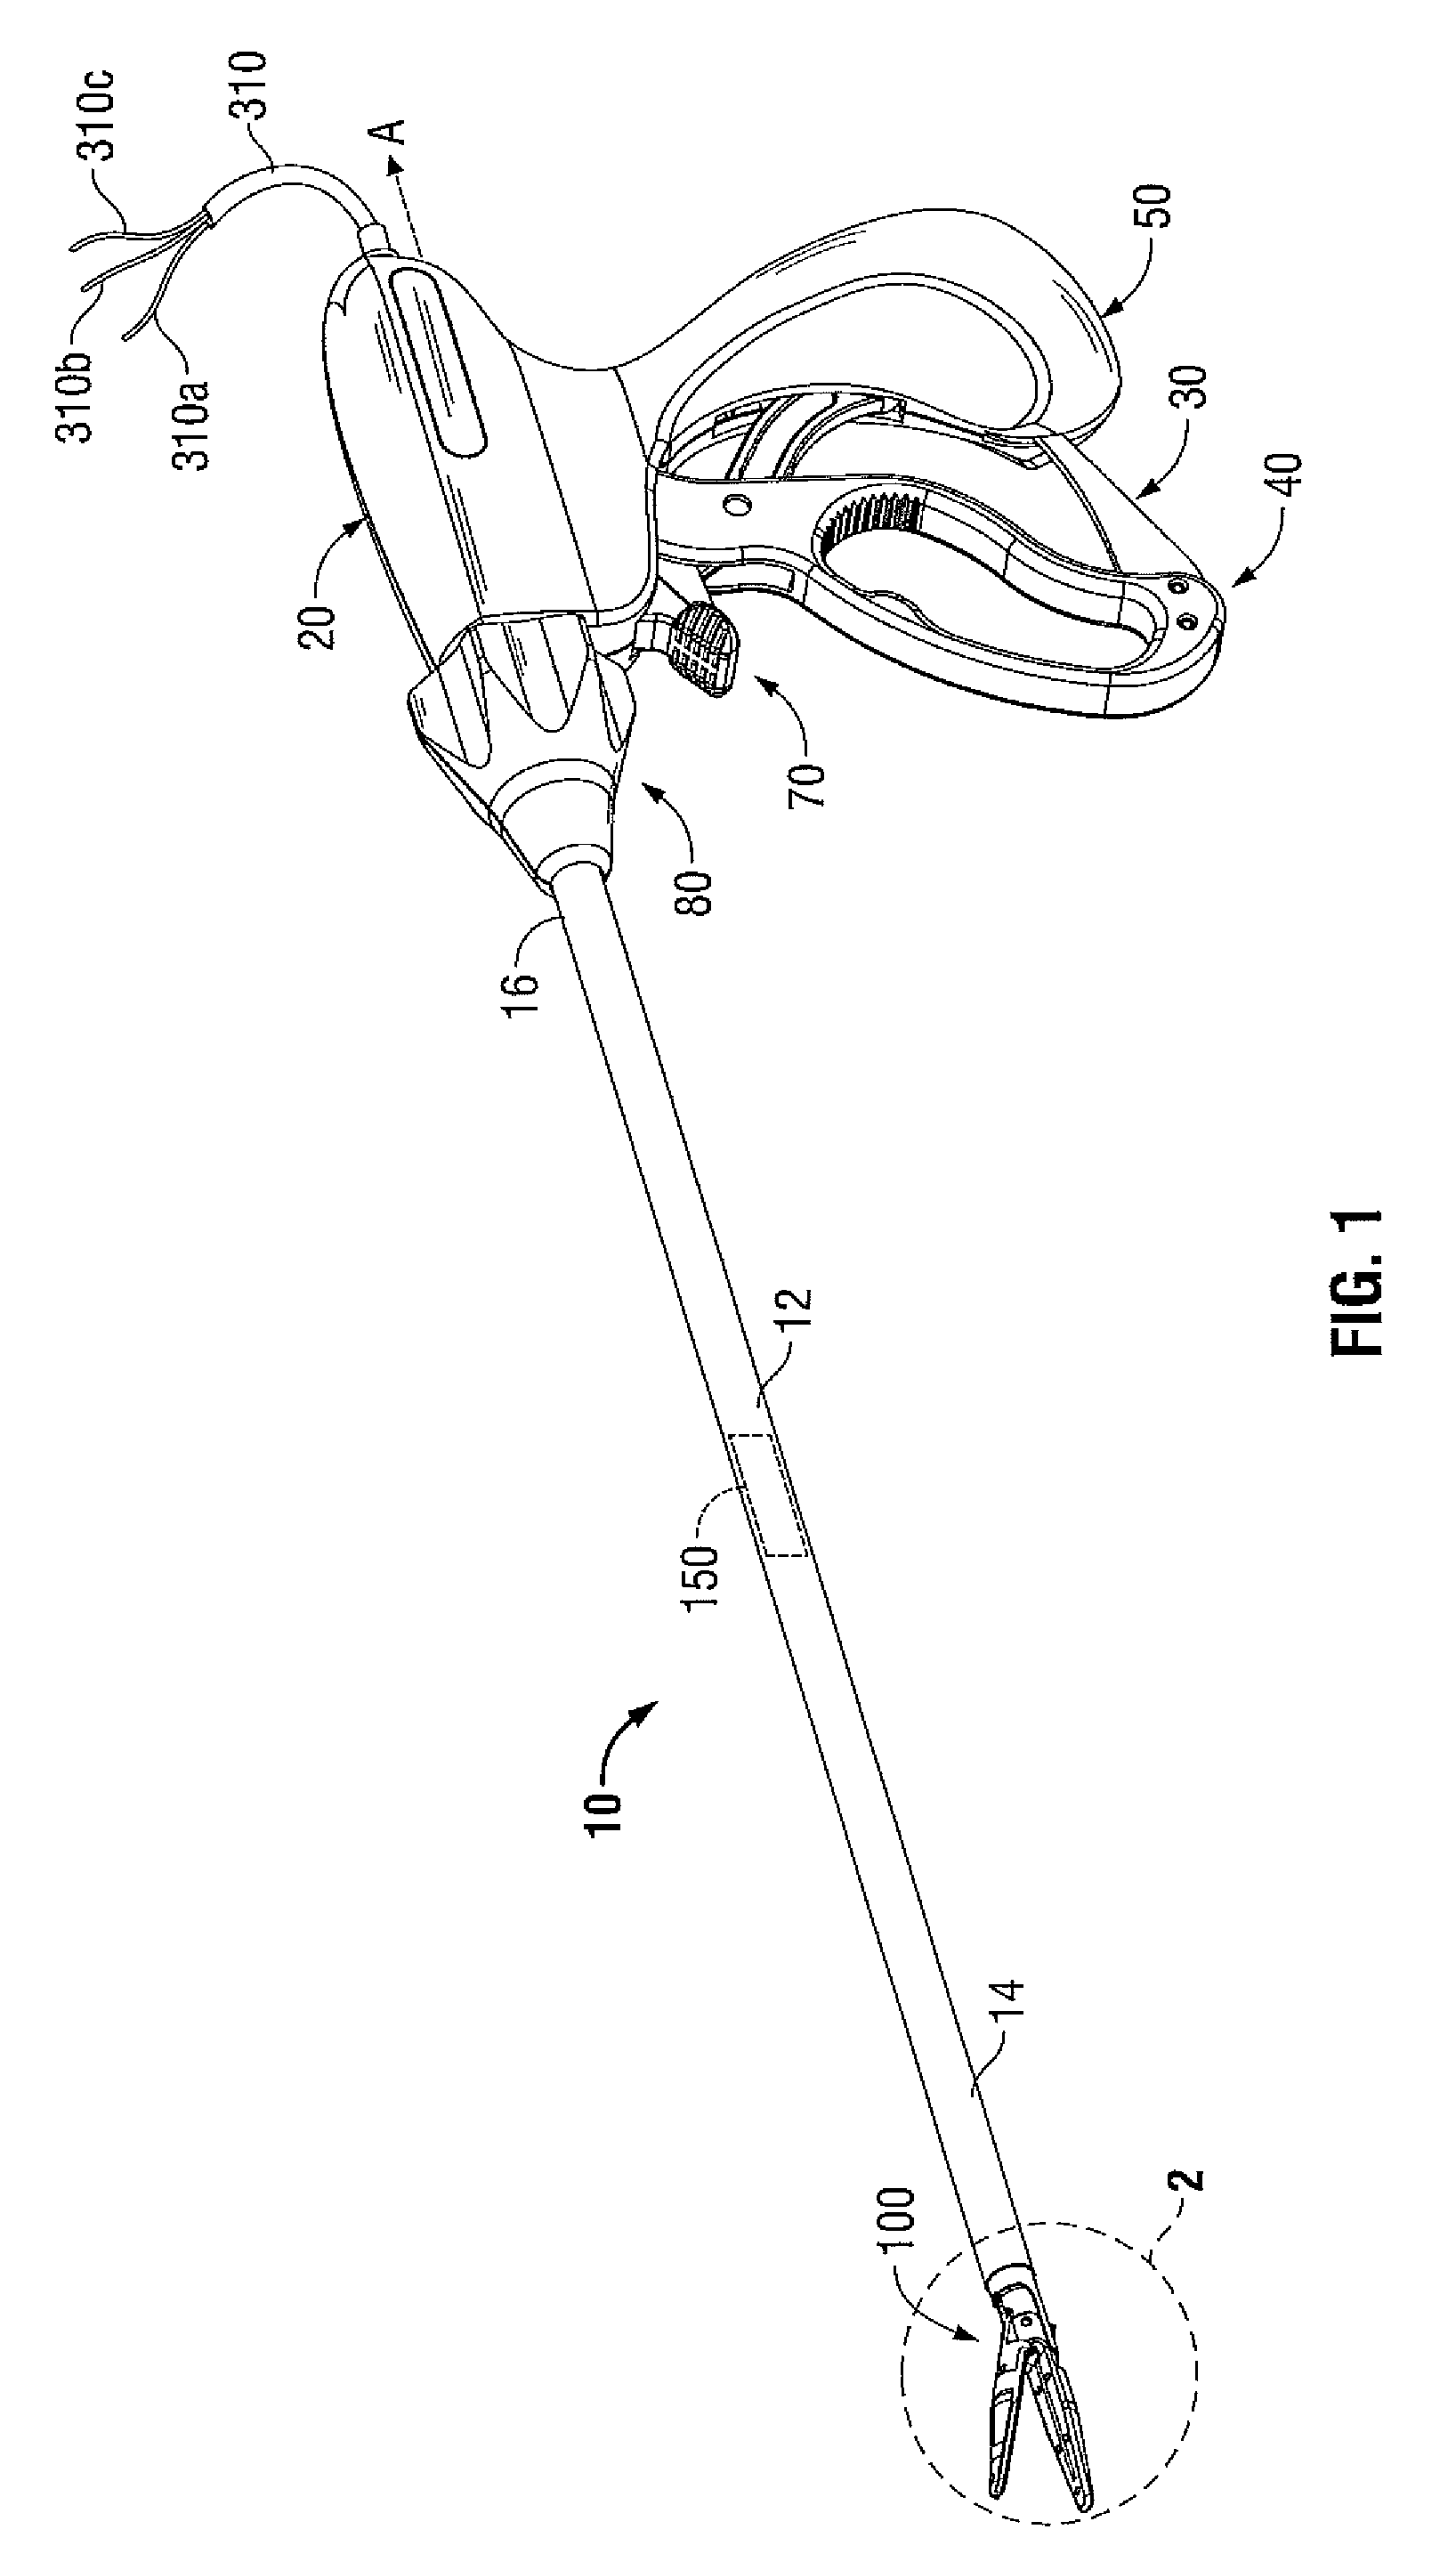 Apparatus, system, and method for performing an endoscopic electrosurgical procedure